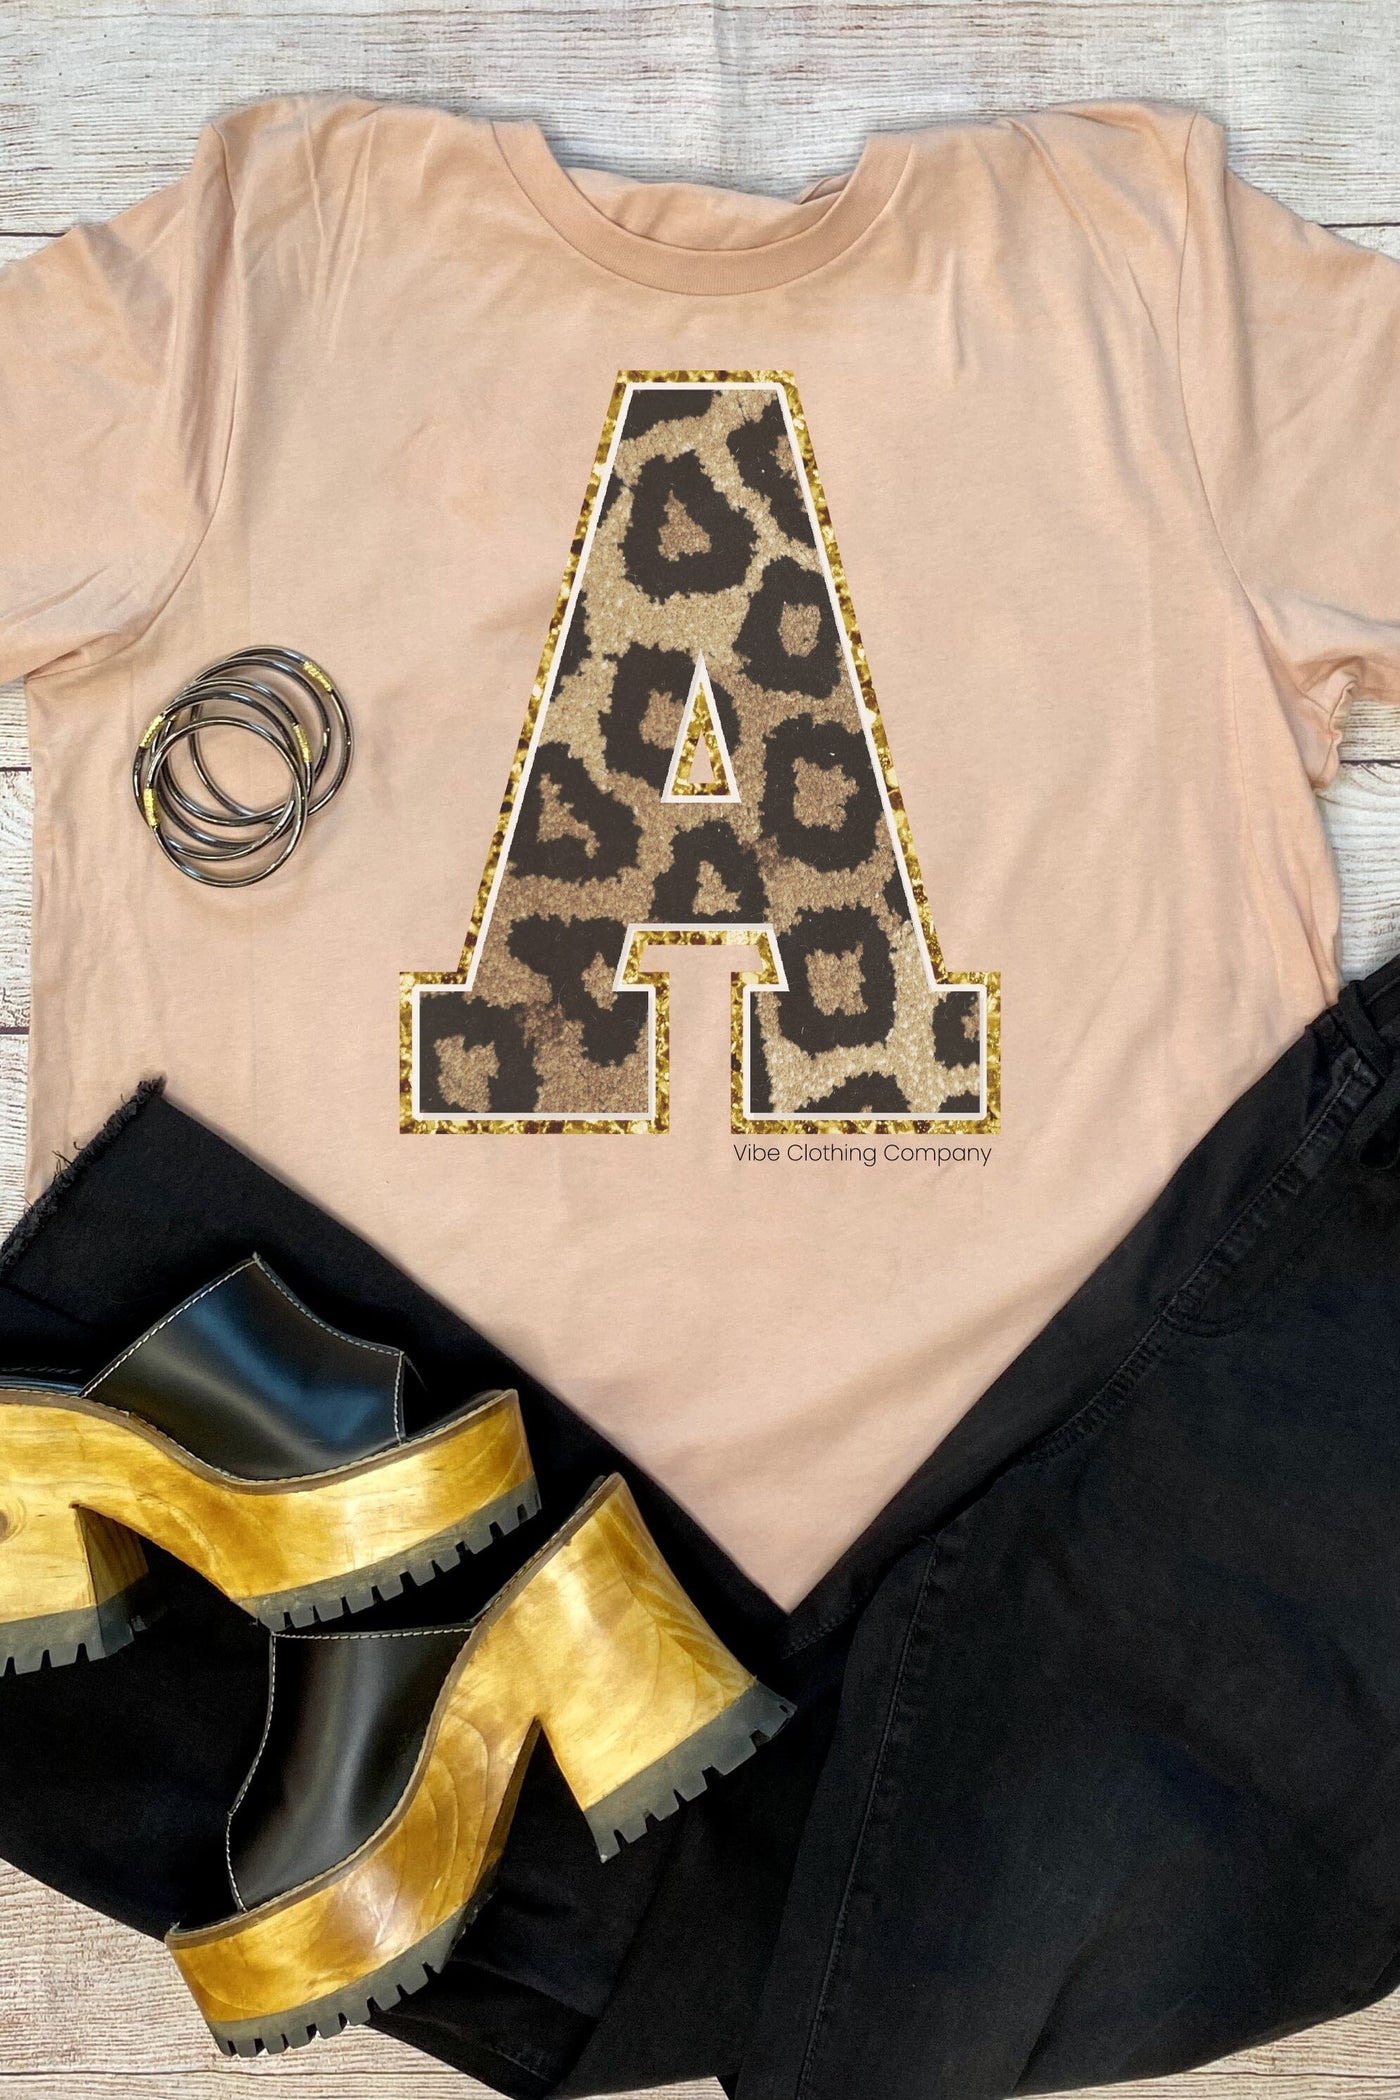 Initials A-M: Blush Graphic Tee graphic tees VCC Small A 